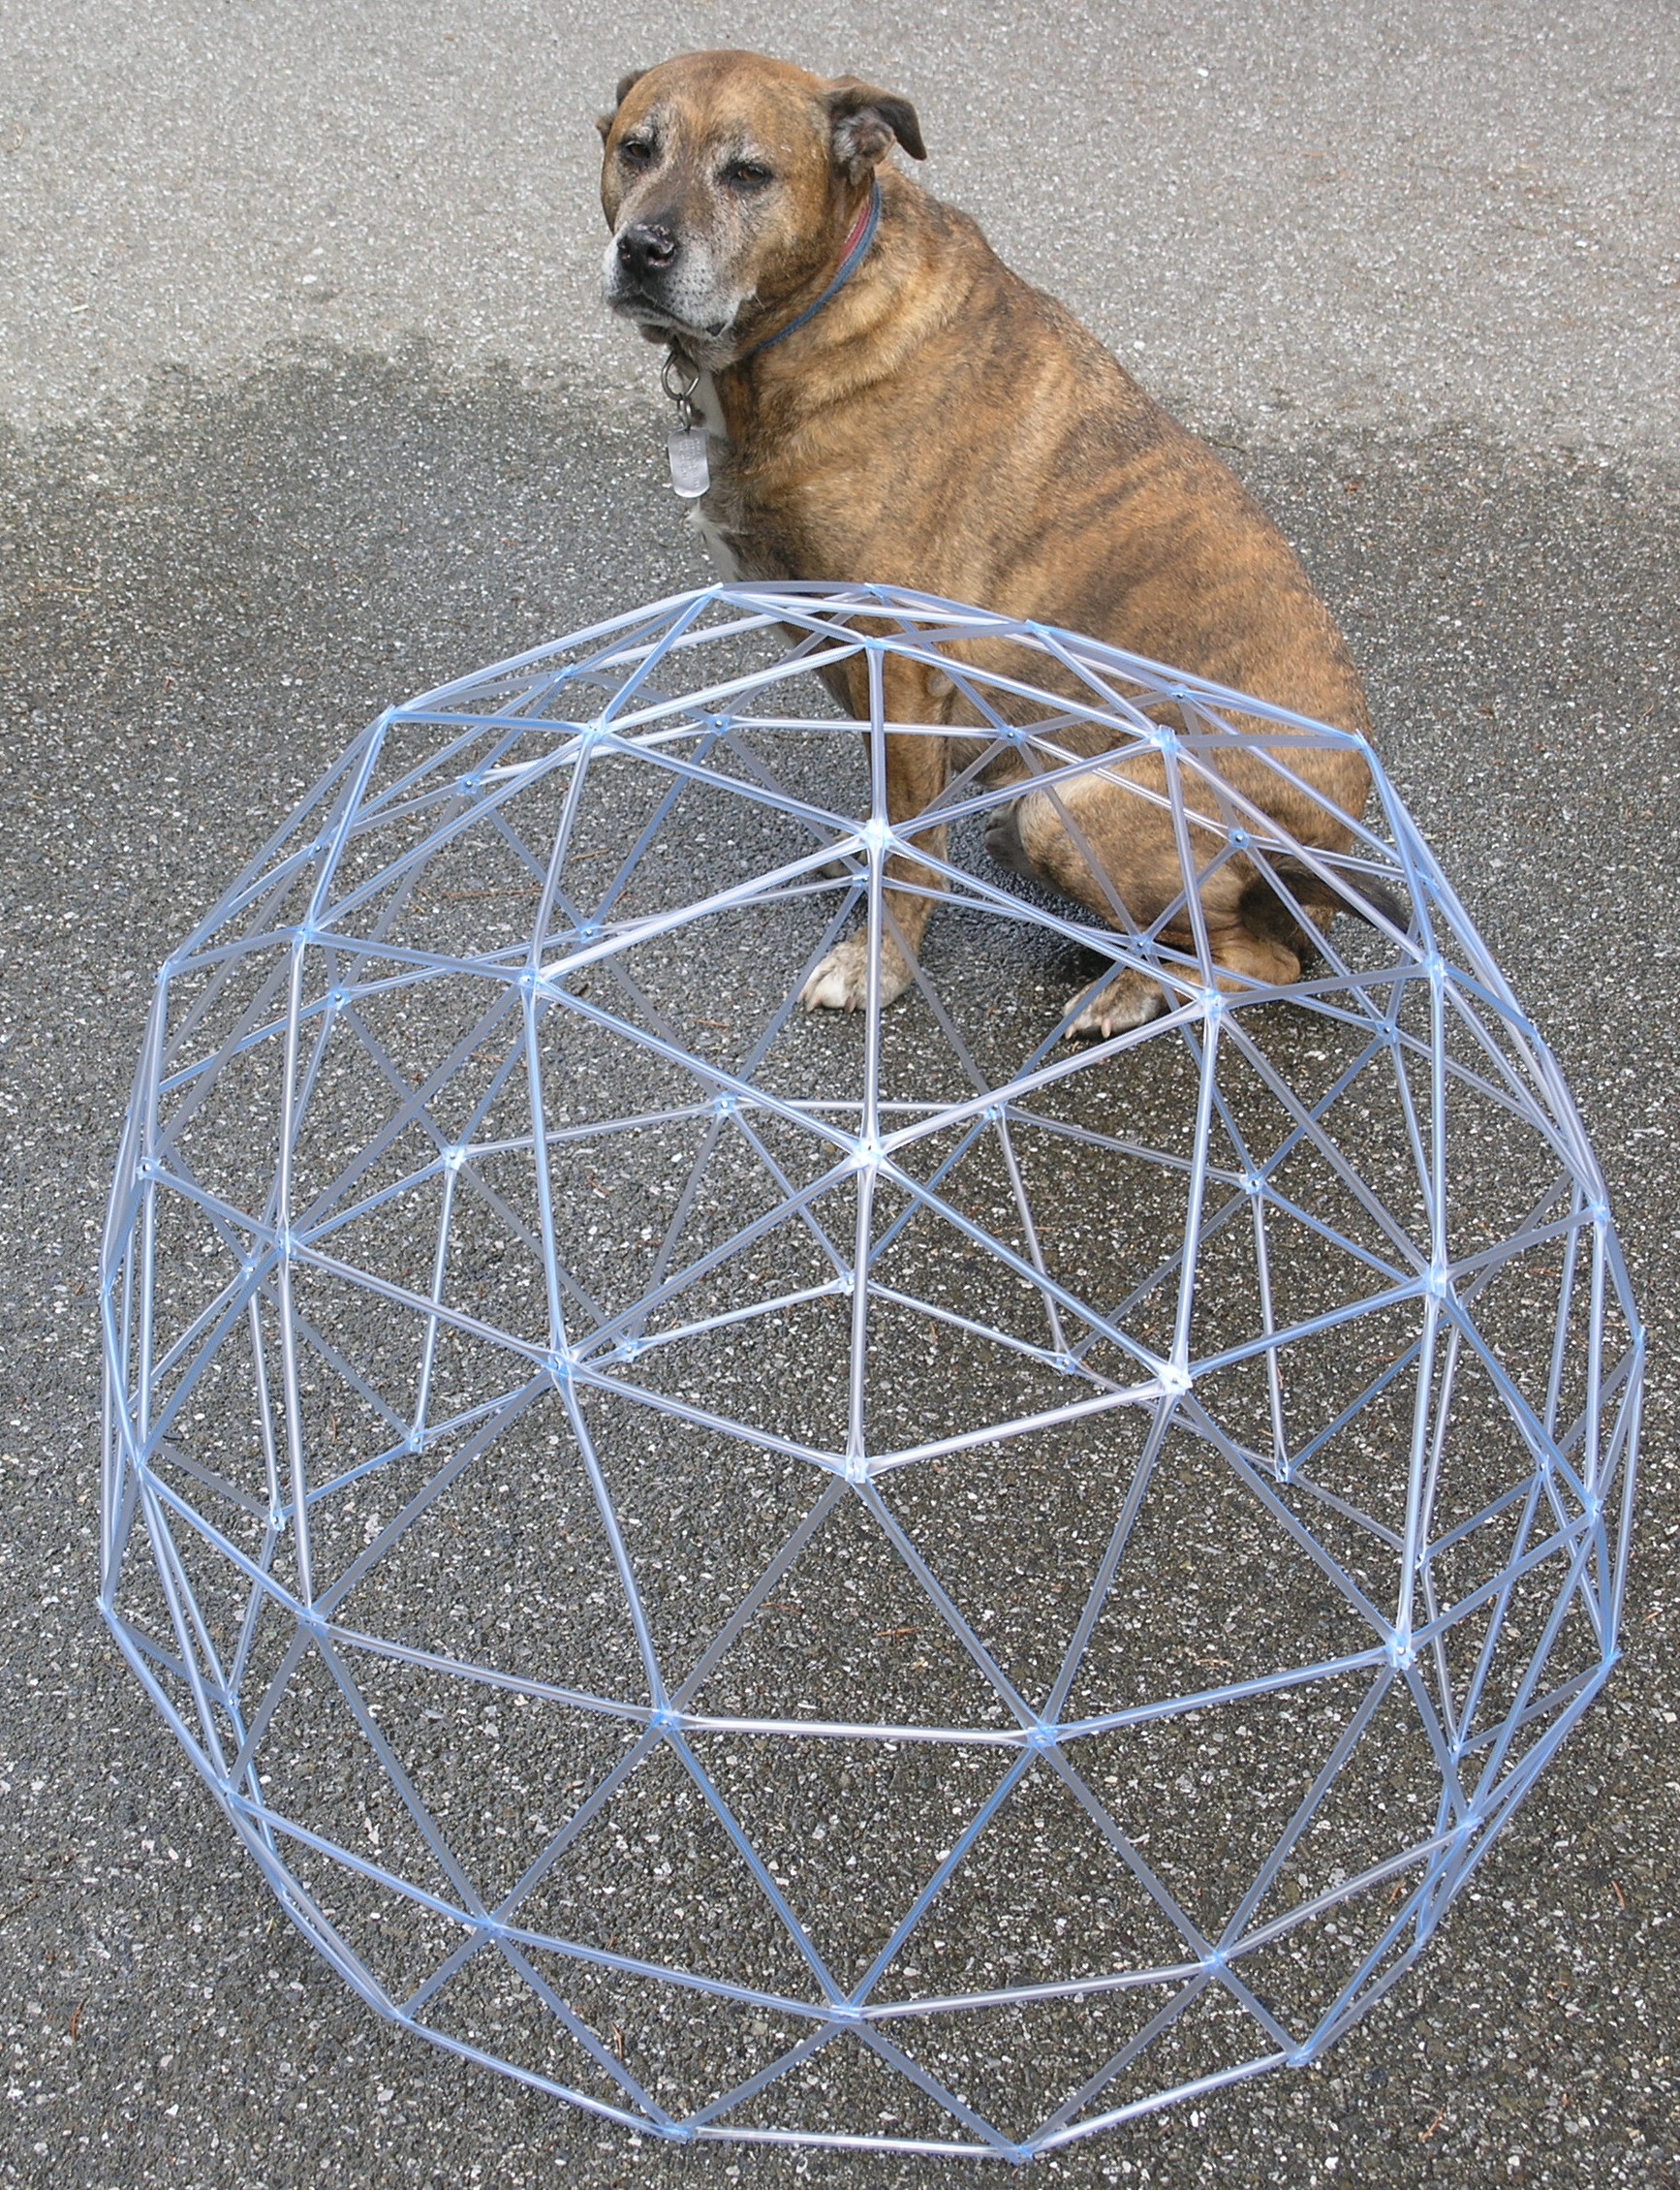 Chapter 9: Mathematics -- Build a homemade geodesic dome